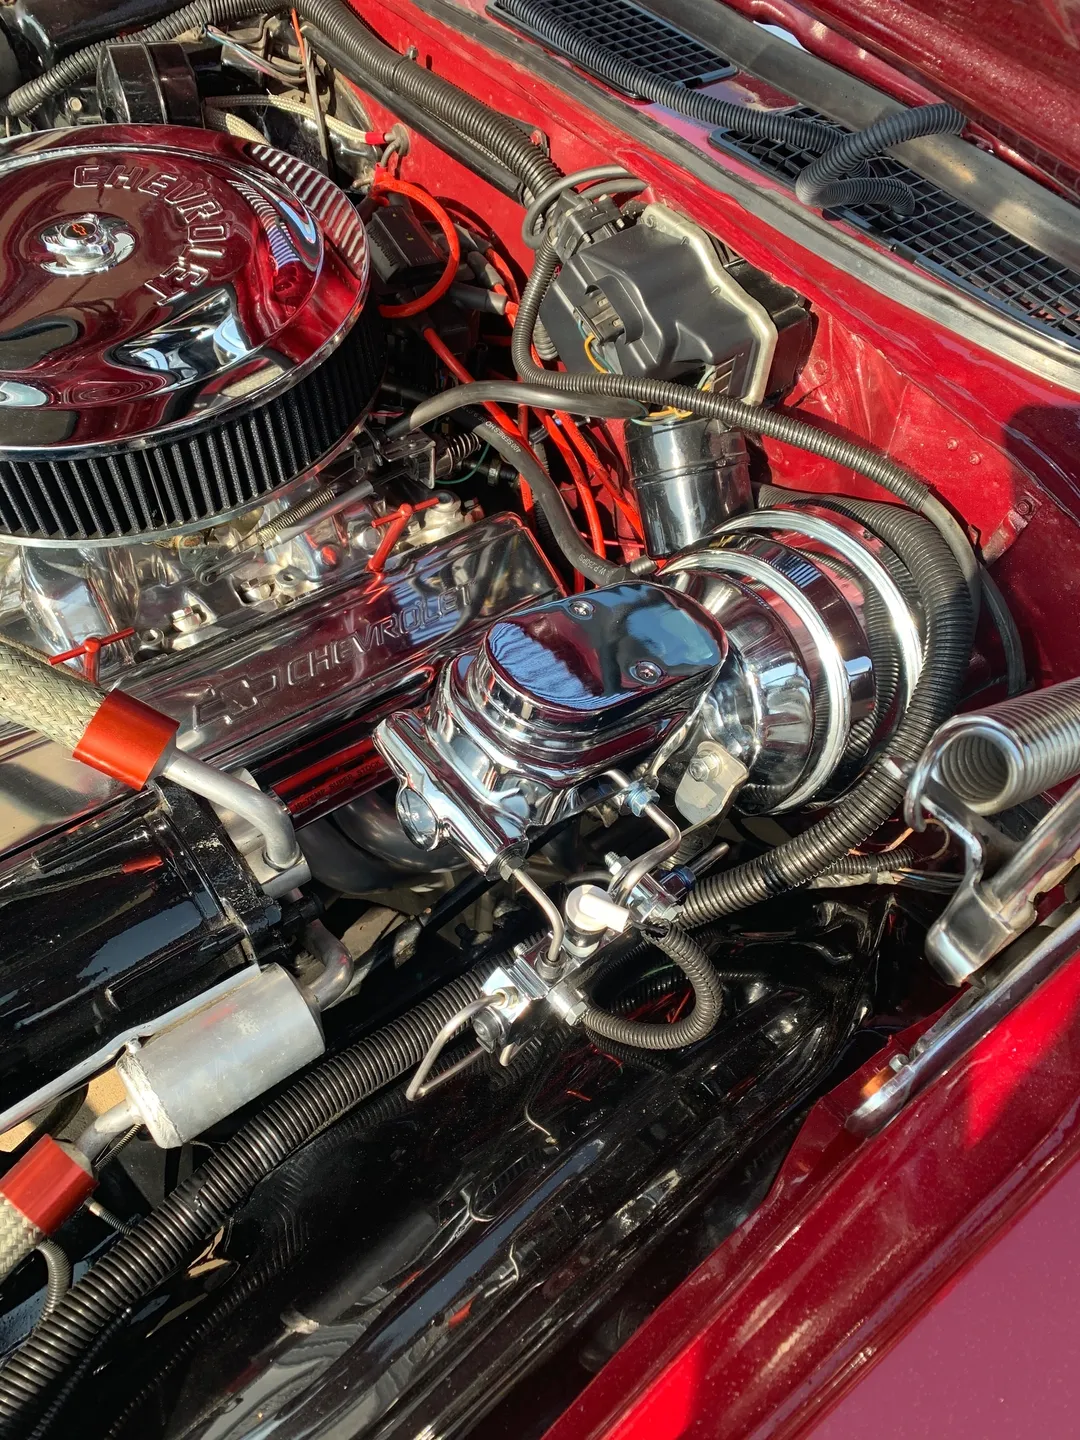 The interior of a red vintage car hood